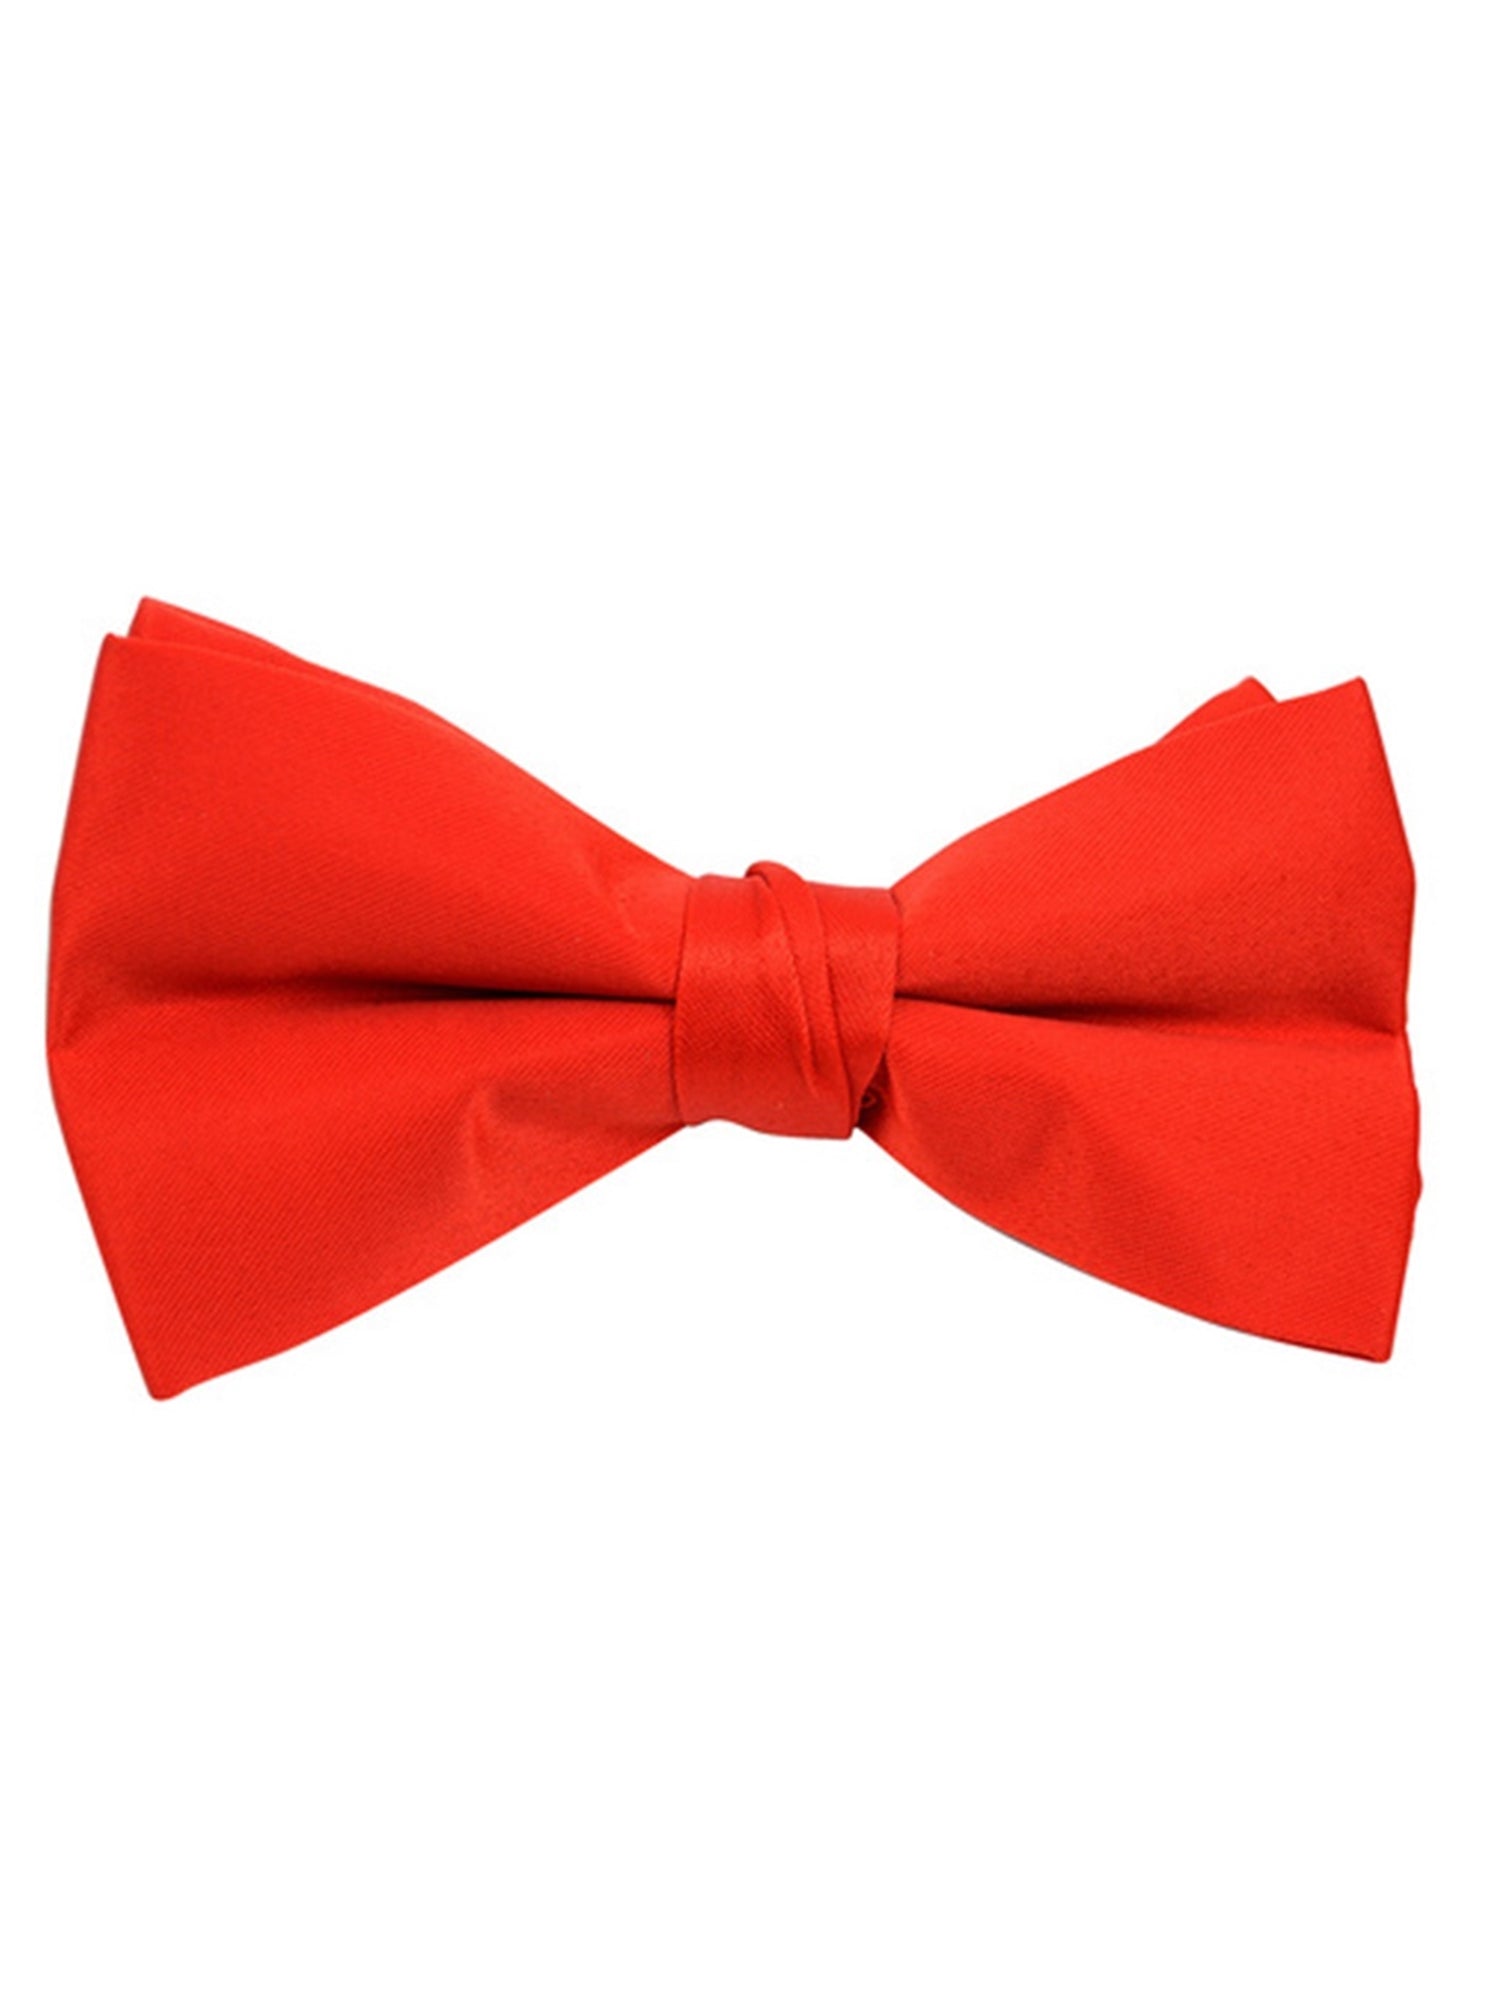 Young Boy's Pre-tied Adjustable Length Bow Tie - Formal Tuxedo Solid Color Boy's Solid Color Bow Tie TheDapperTie Red One Size 